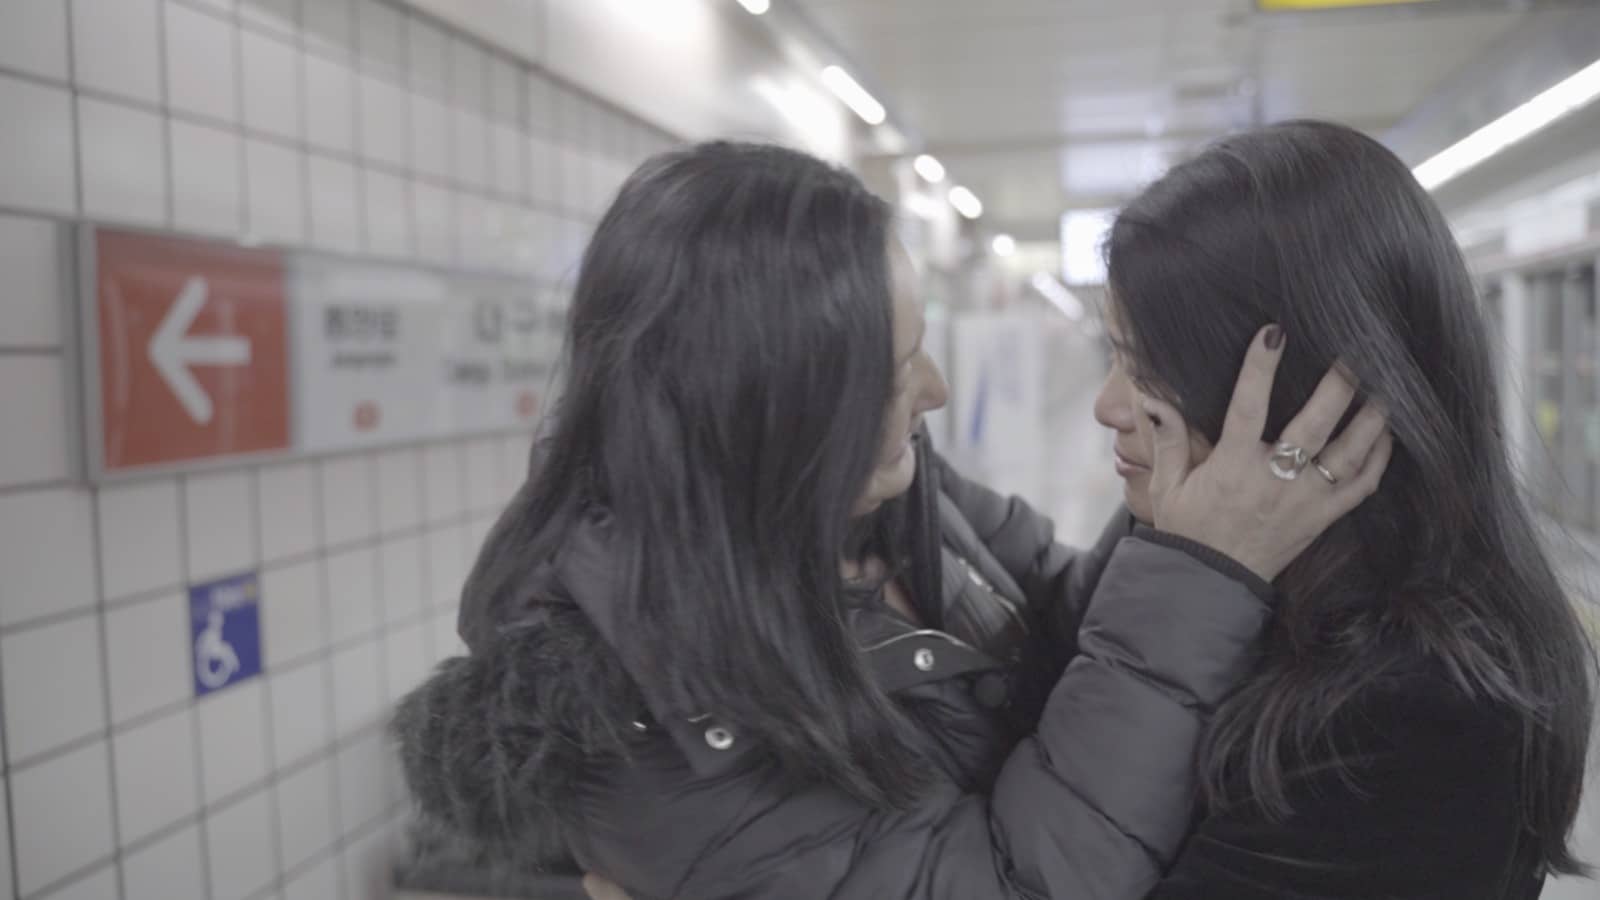 Christine and Kim meet for the first time on the subway platform in Daegu where they were abandoned.